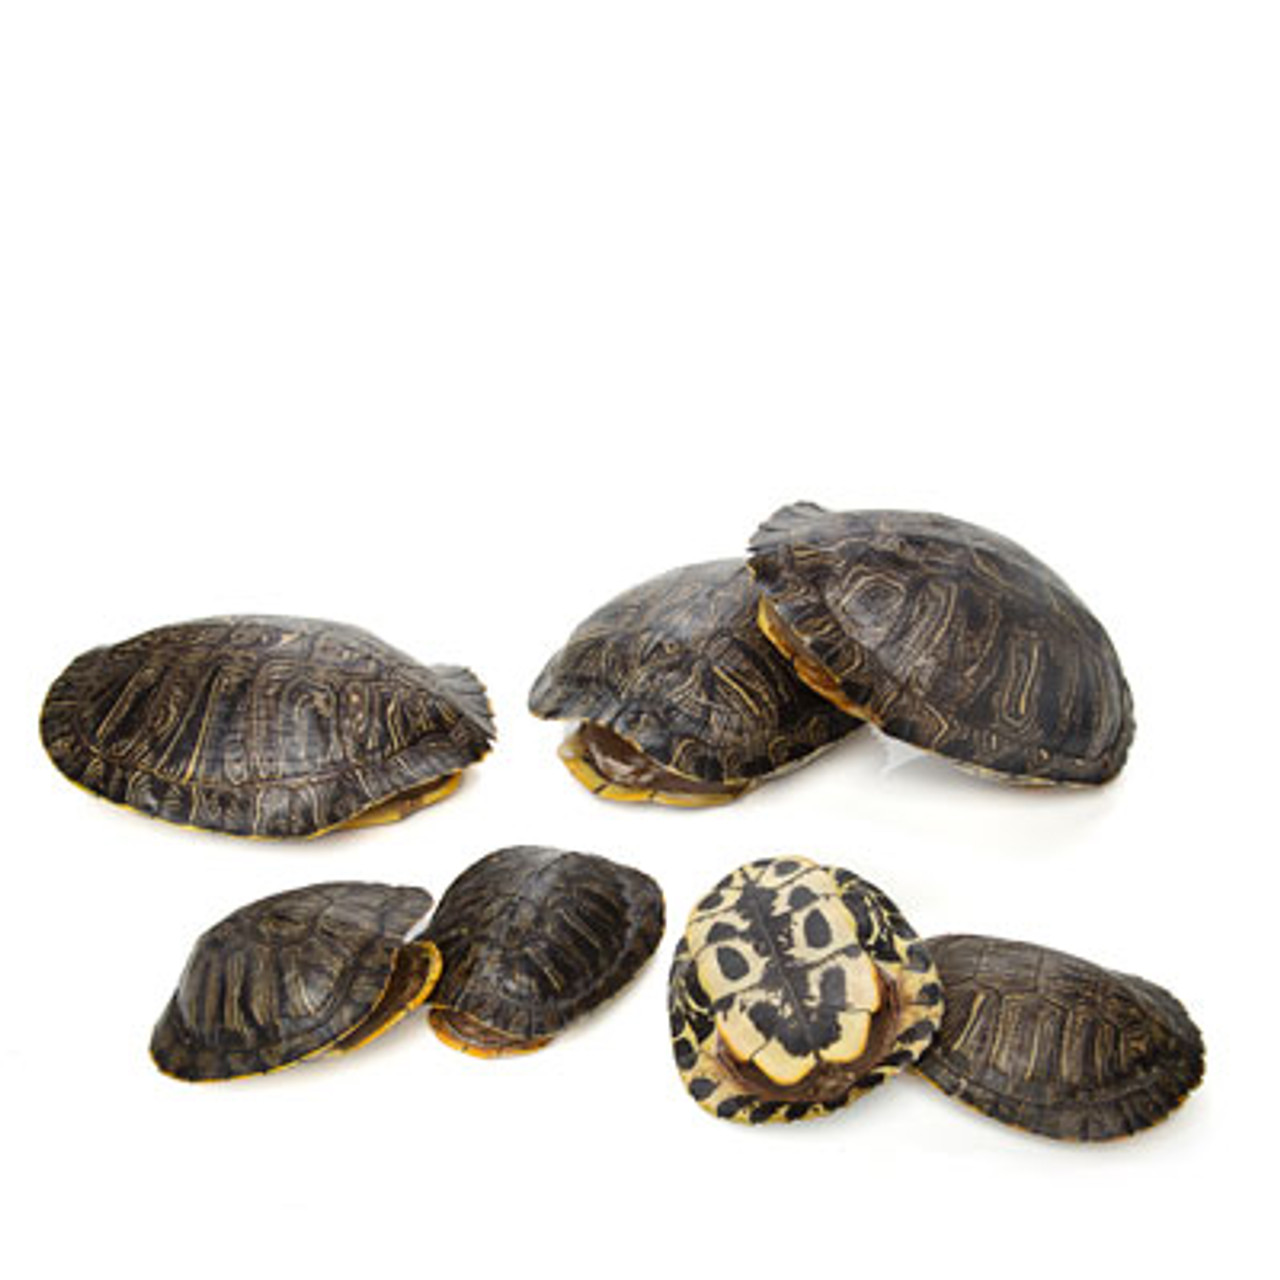 Pond Turtle Shell (7-8 inches) (Natural Bone Quality A) Red Eared Slider  Real Turtle Shell - Genuine - Authentic